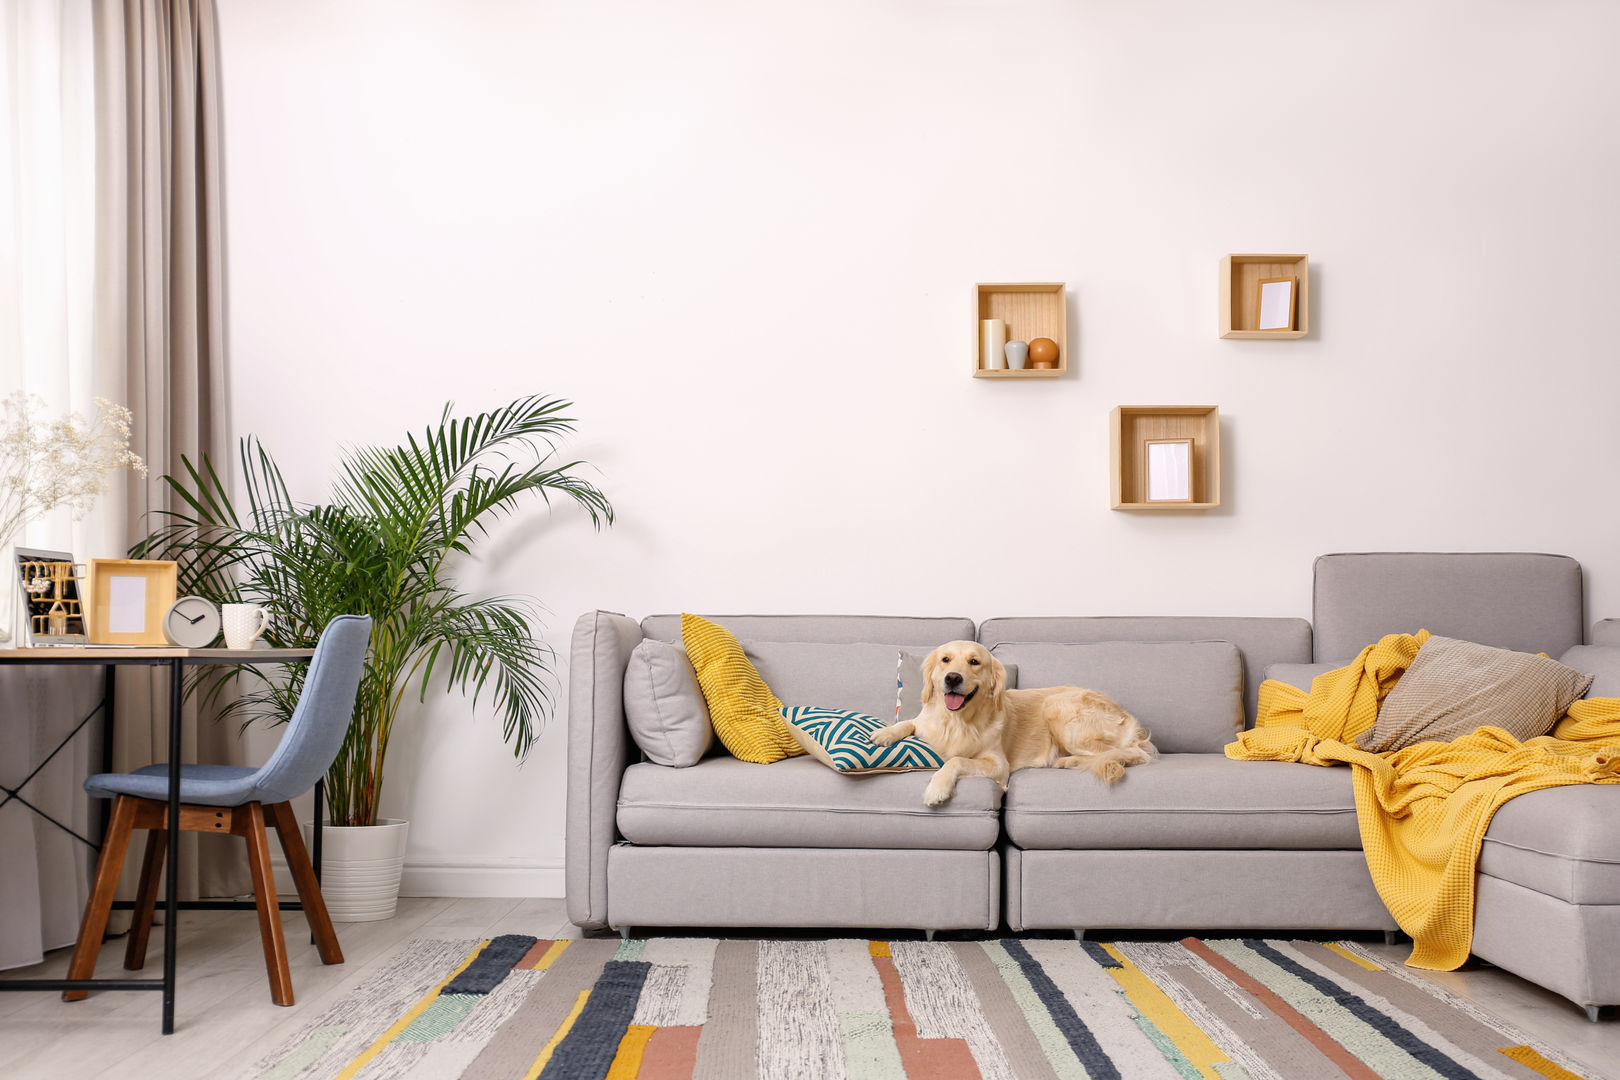 Tips for Picking Out Pet-Friendly Furniture, Press profile homify Press profile homify Modern Living Room Accessories & decoration